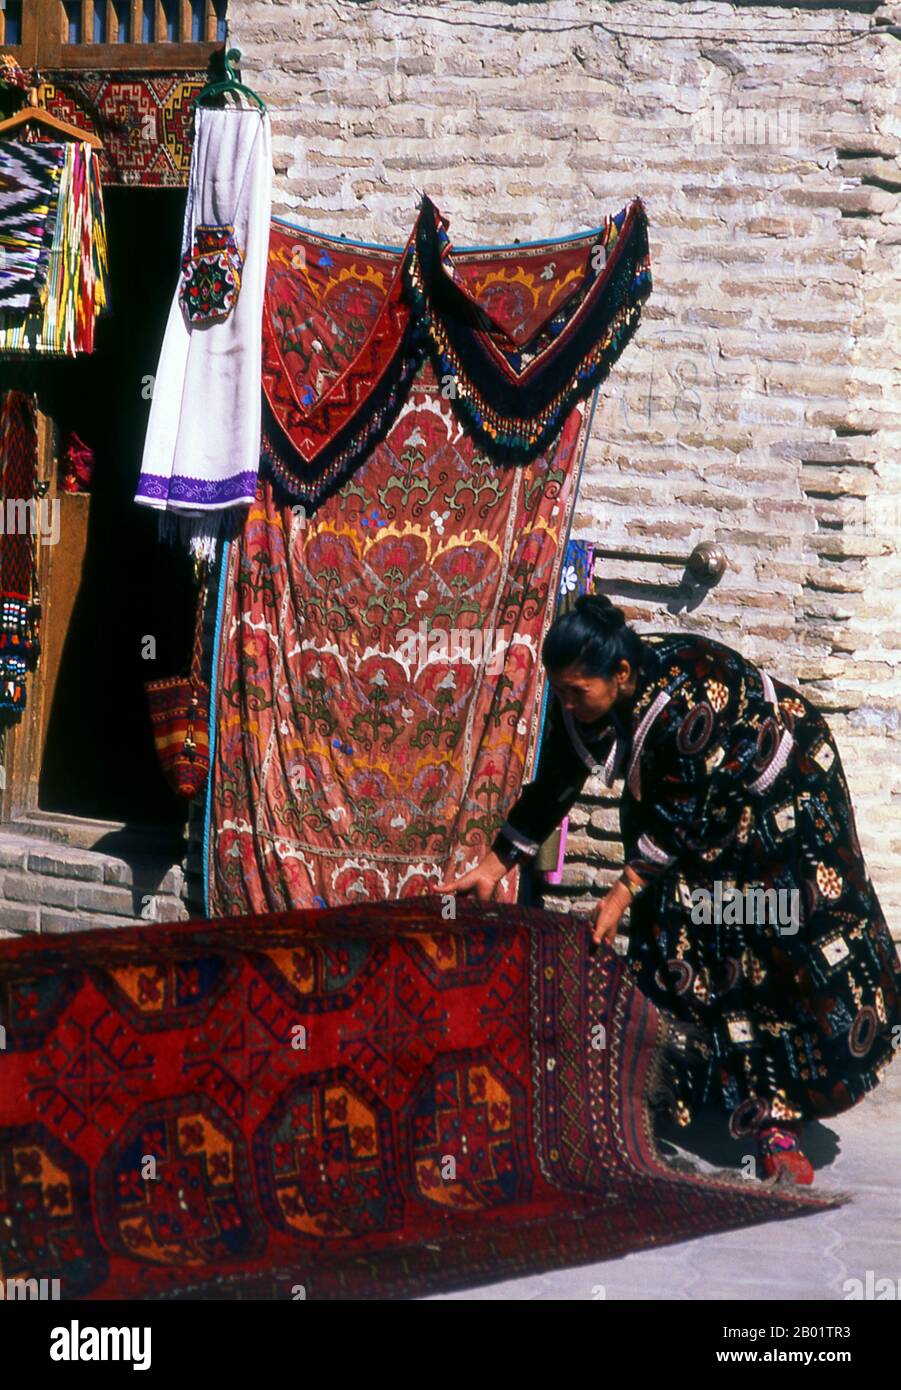 Uzbekistan: Carpet seller at the Taqi Telpak Furushon (the cap makers) Bazaar, Bukhara.  Bukhara was founded in 500 BCE in the area now called the Ark. However, the Bukhara oasis had been inhabited long before.  The city has been one of the main centres of Persian civilisation from its early days in 6th century BCE. From the 6th century CE, Turkic speakers gradually moved in.  Bukhara's architecture and archaeological sites form one of the pillars of Central Asian history and art. The region of Bukhara was for a long period a part of the Persian Empire. Stock Photo